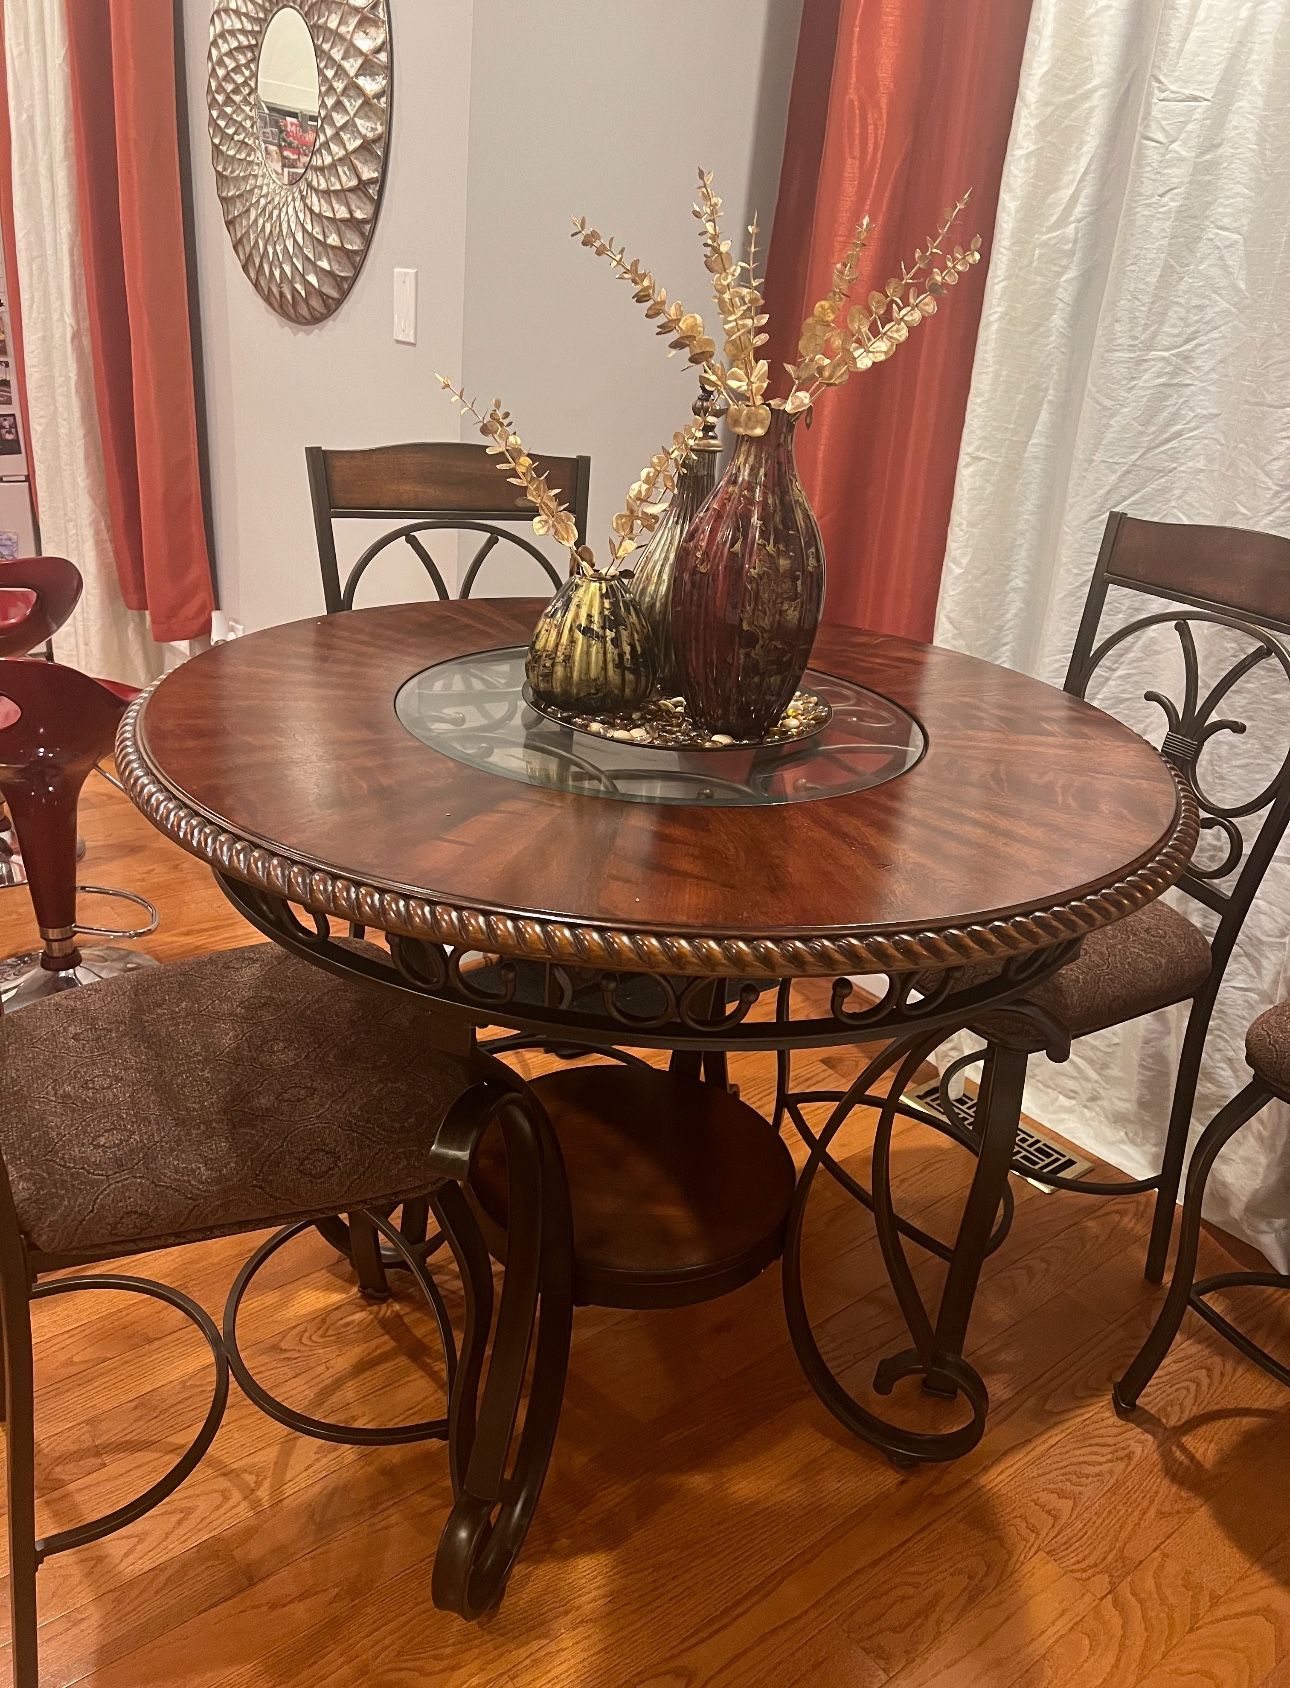 Round wooden dinner table